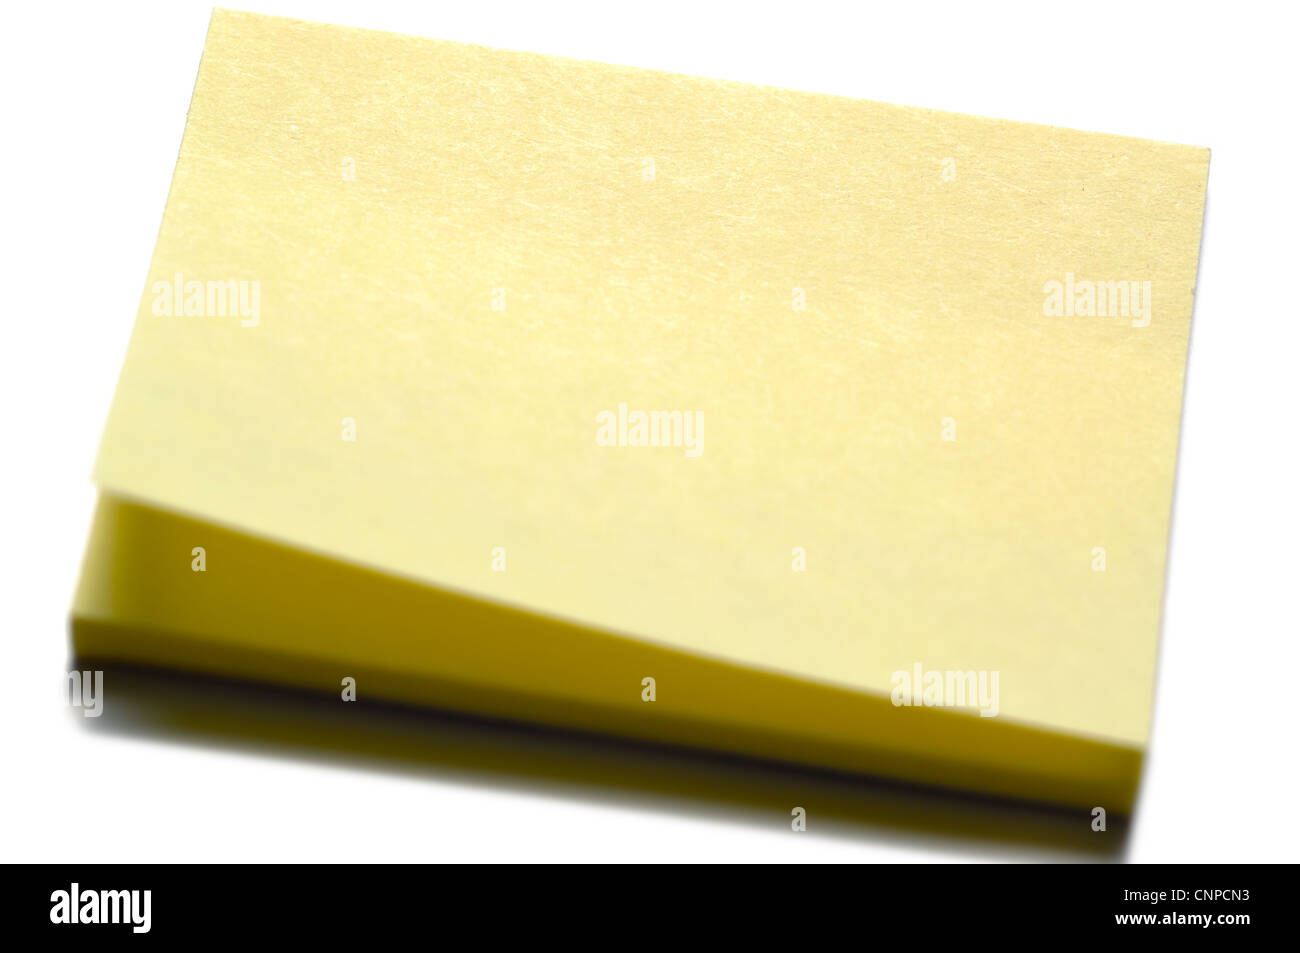 Recycle adhesive note Stock Photo